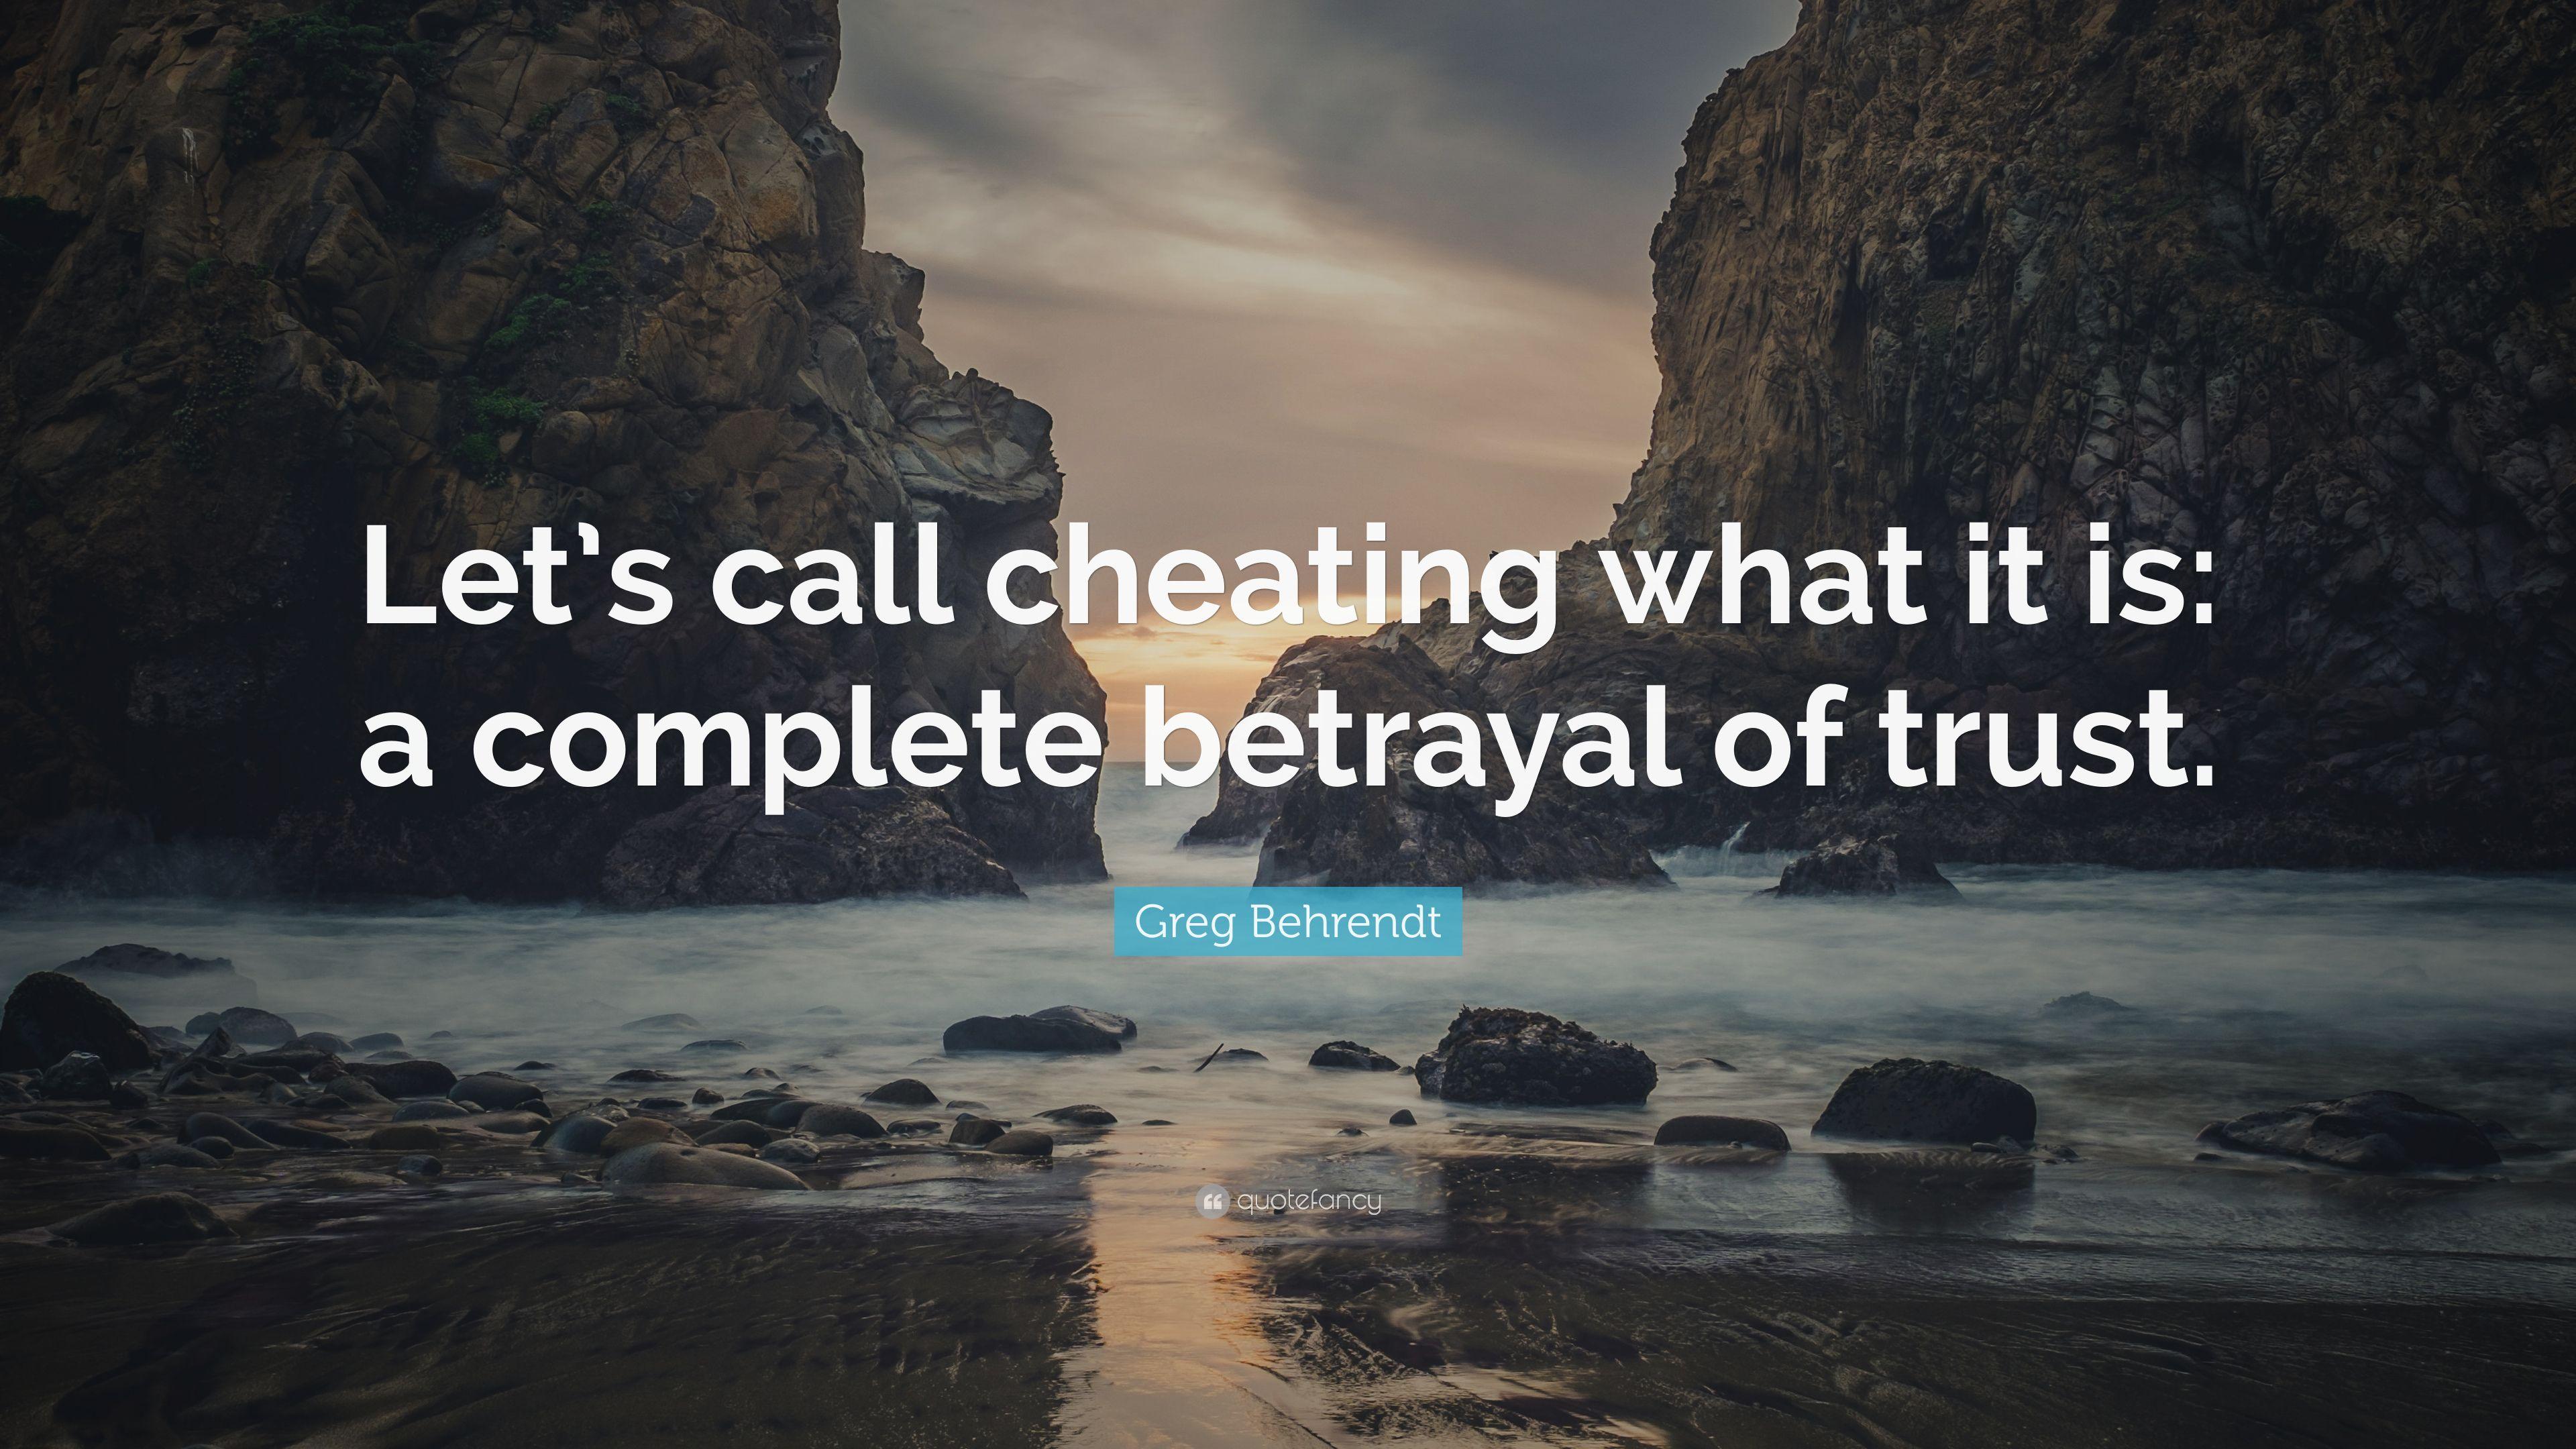 Greg Behrendt Quote: “Let's call cheating what it is: a complete betrayal of trust.” (7 wallpaper)